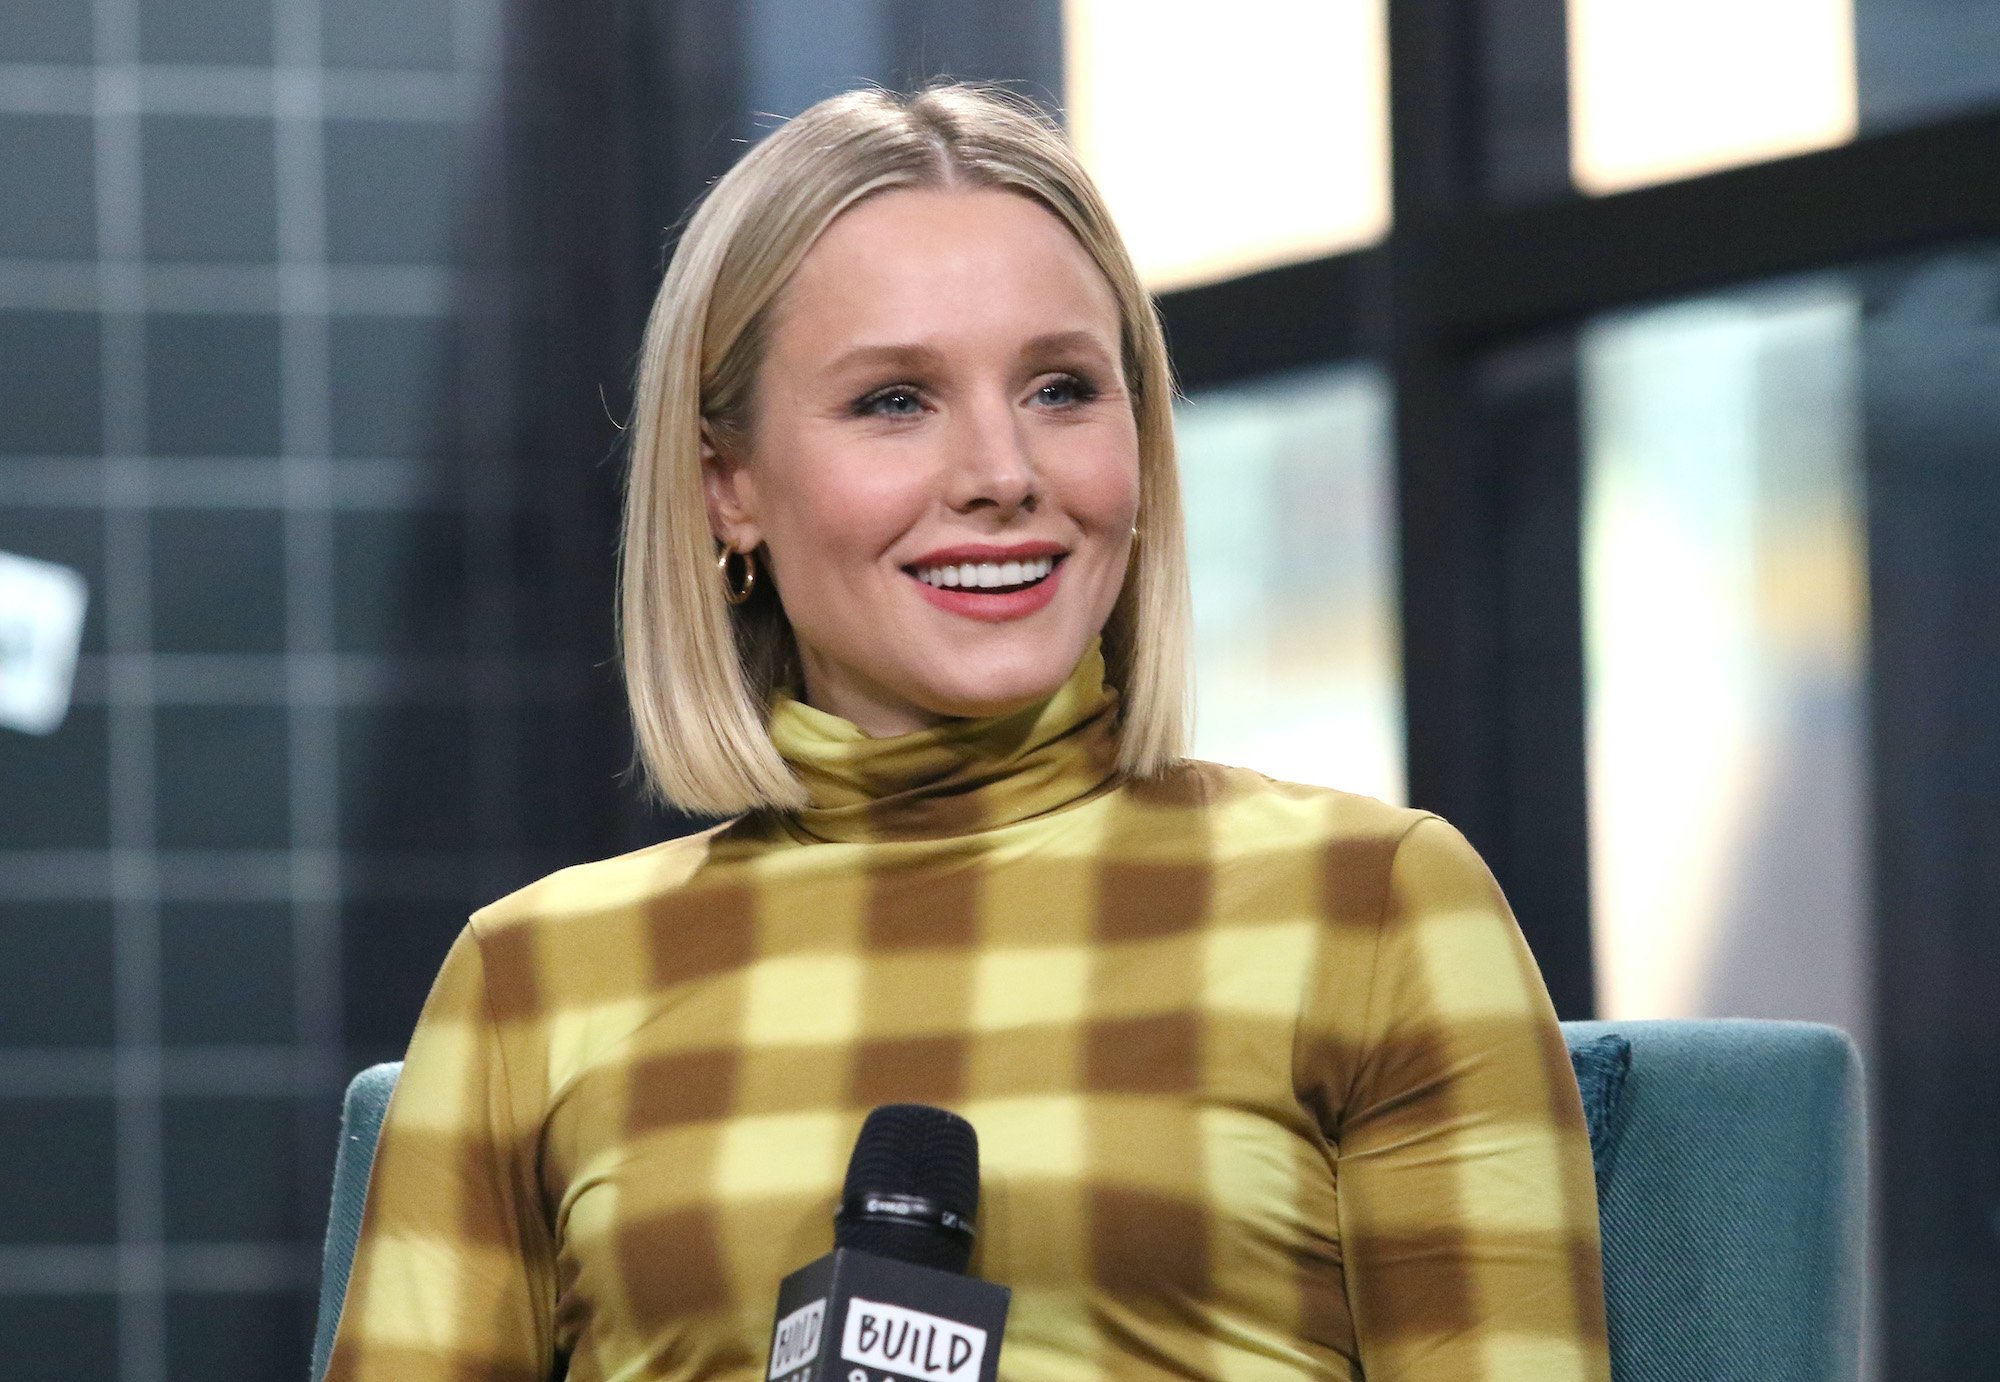 Kristen Bell speaks into a microphone during an interview